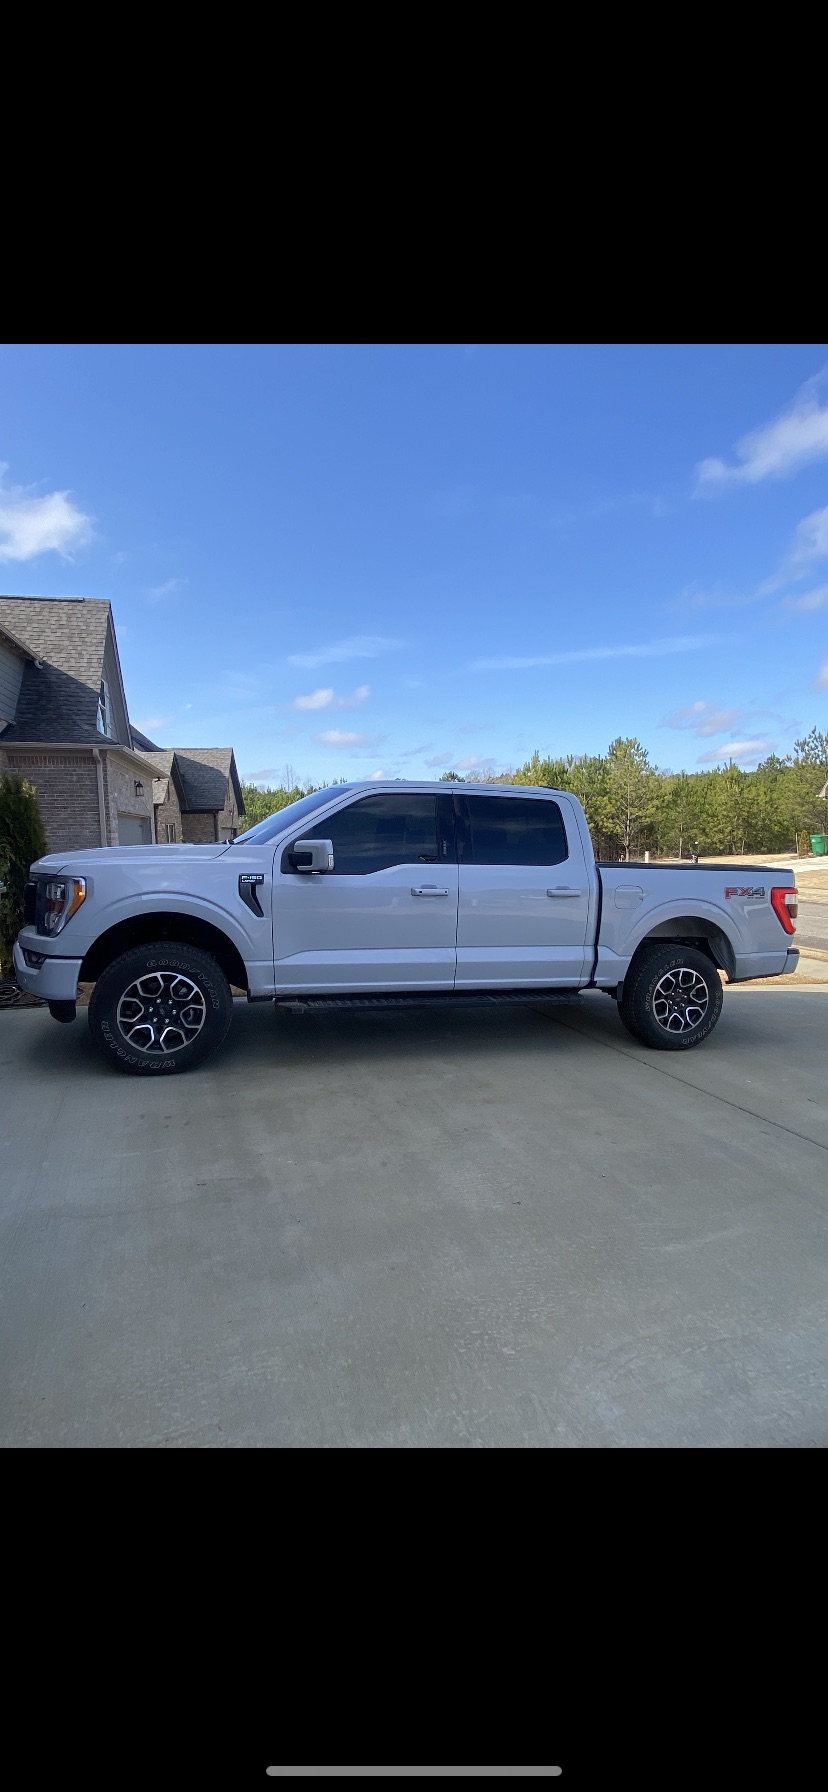 Ford F-150 Anyone installed the new Readylift 2" level kit specifically for 2021 F-150? A300B2F6-53E3-453A-9D78-75D3787D04E8